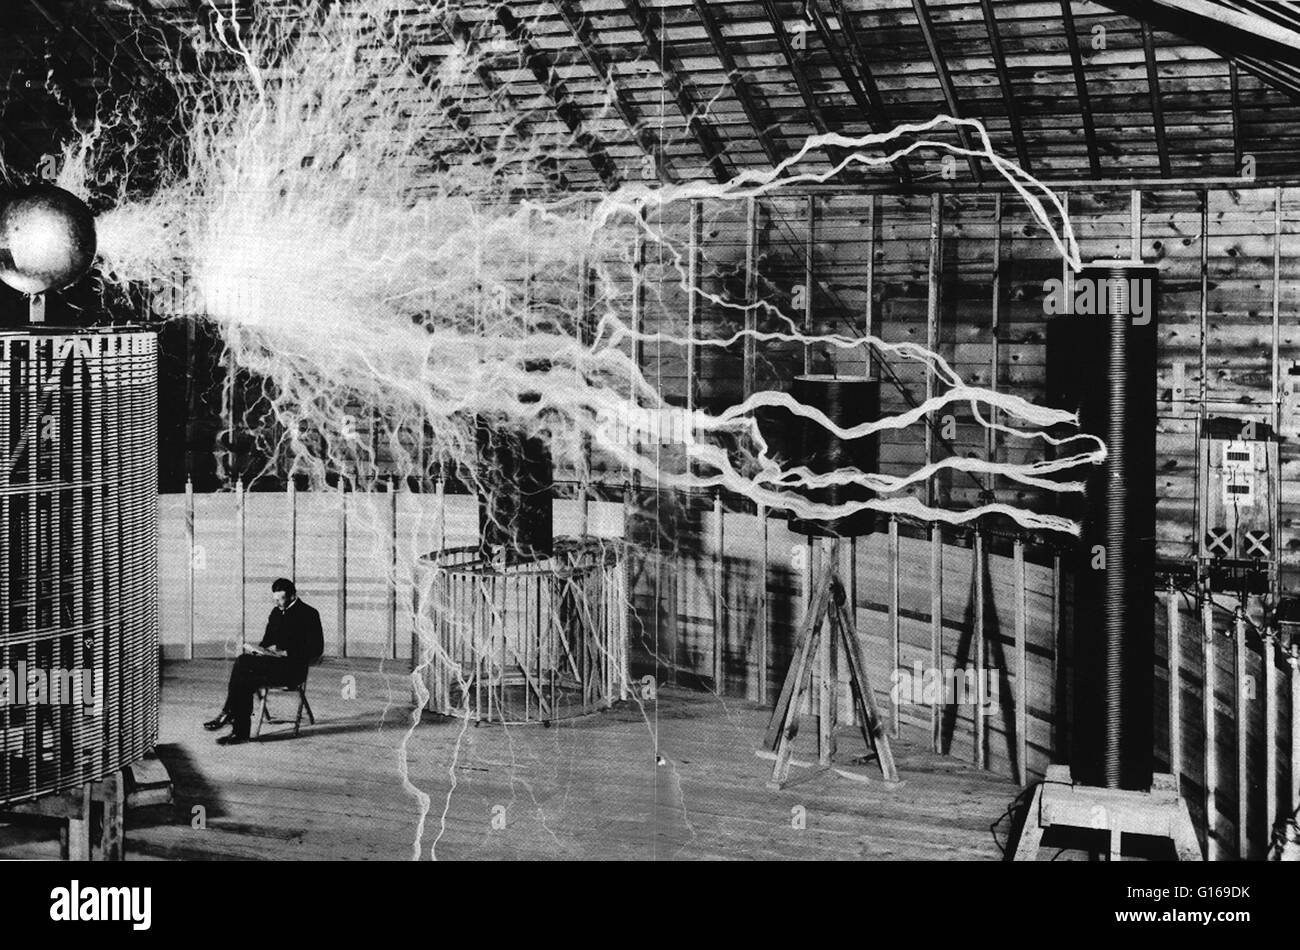 Publicity picture of Tesla sitting in his Colorado Springs laboratory with his 'Magnifying transmitter' generating millions of volts and producing 23 foot long arcs. The image was created using trick photography via a double exposure. The electrical bolts Stock Photo